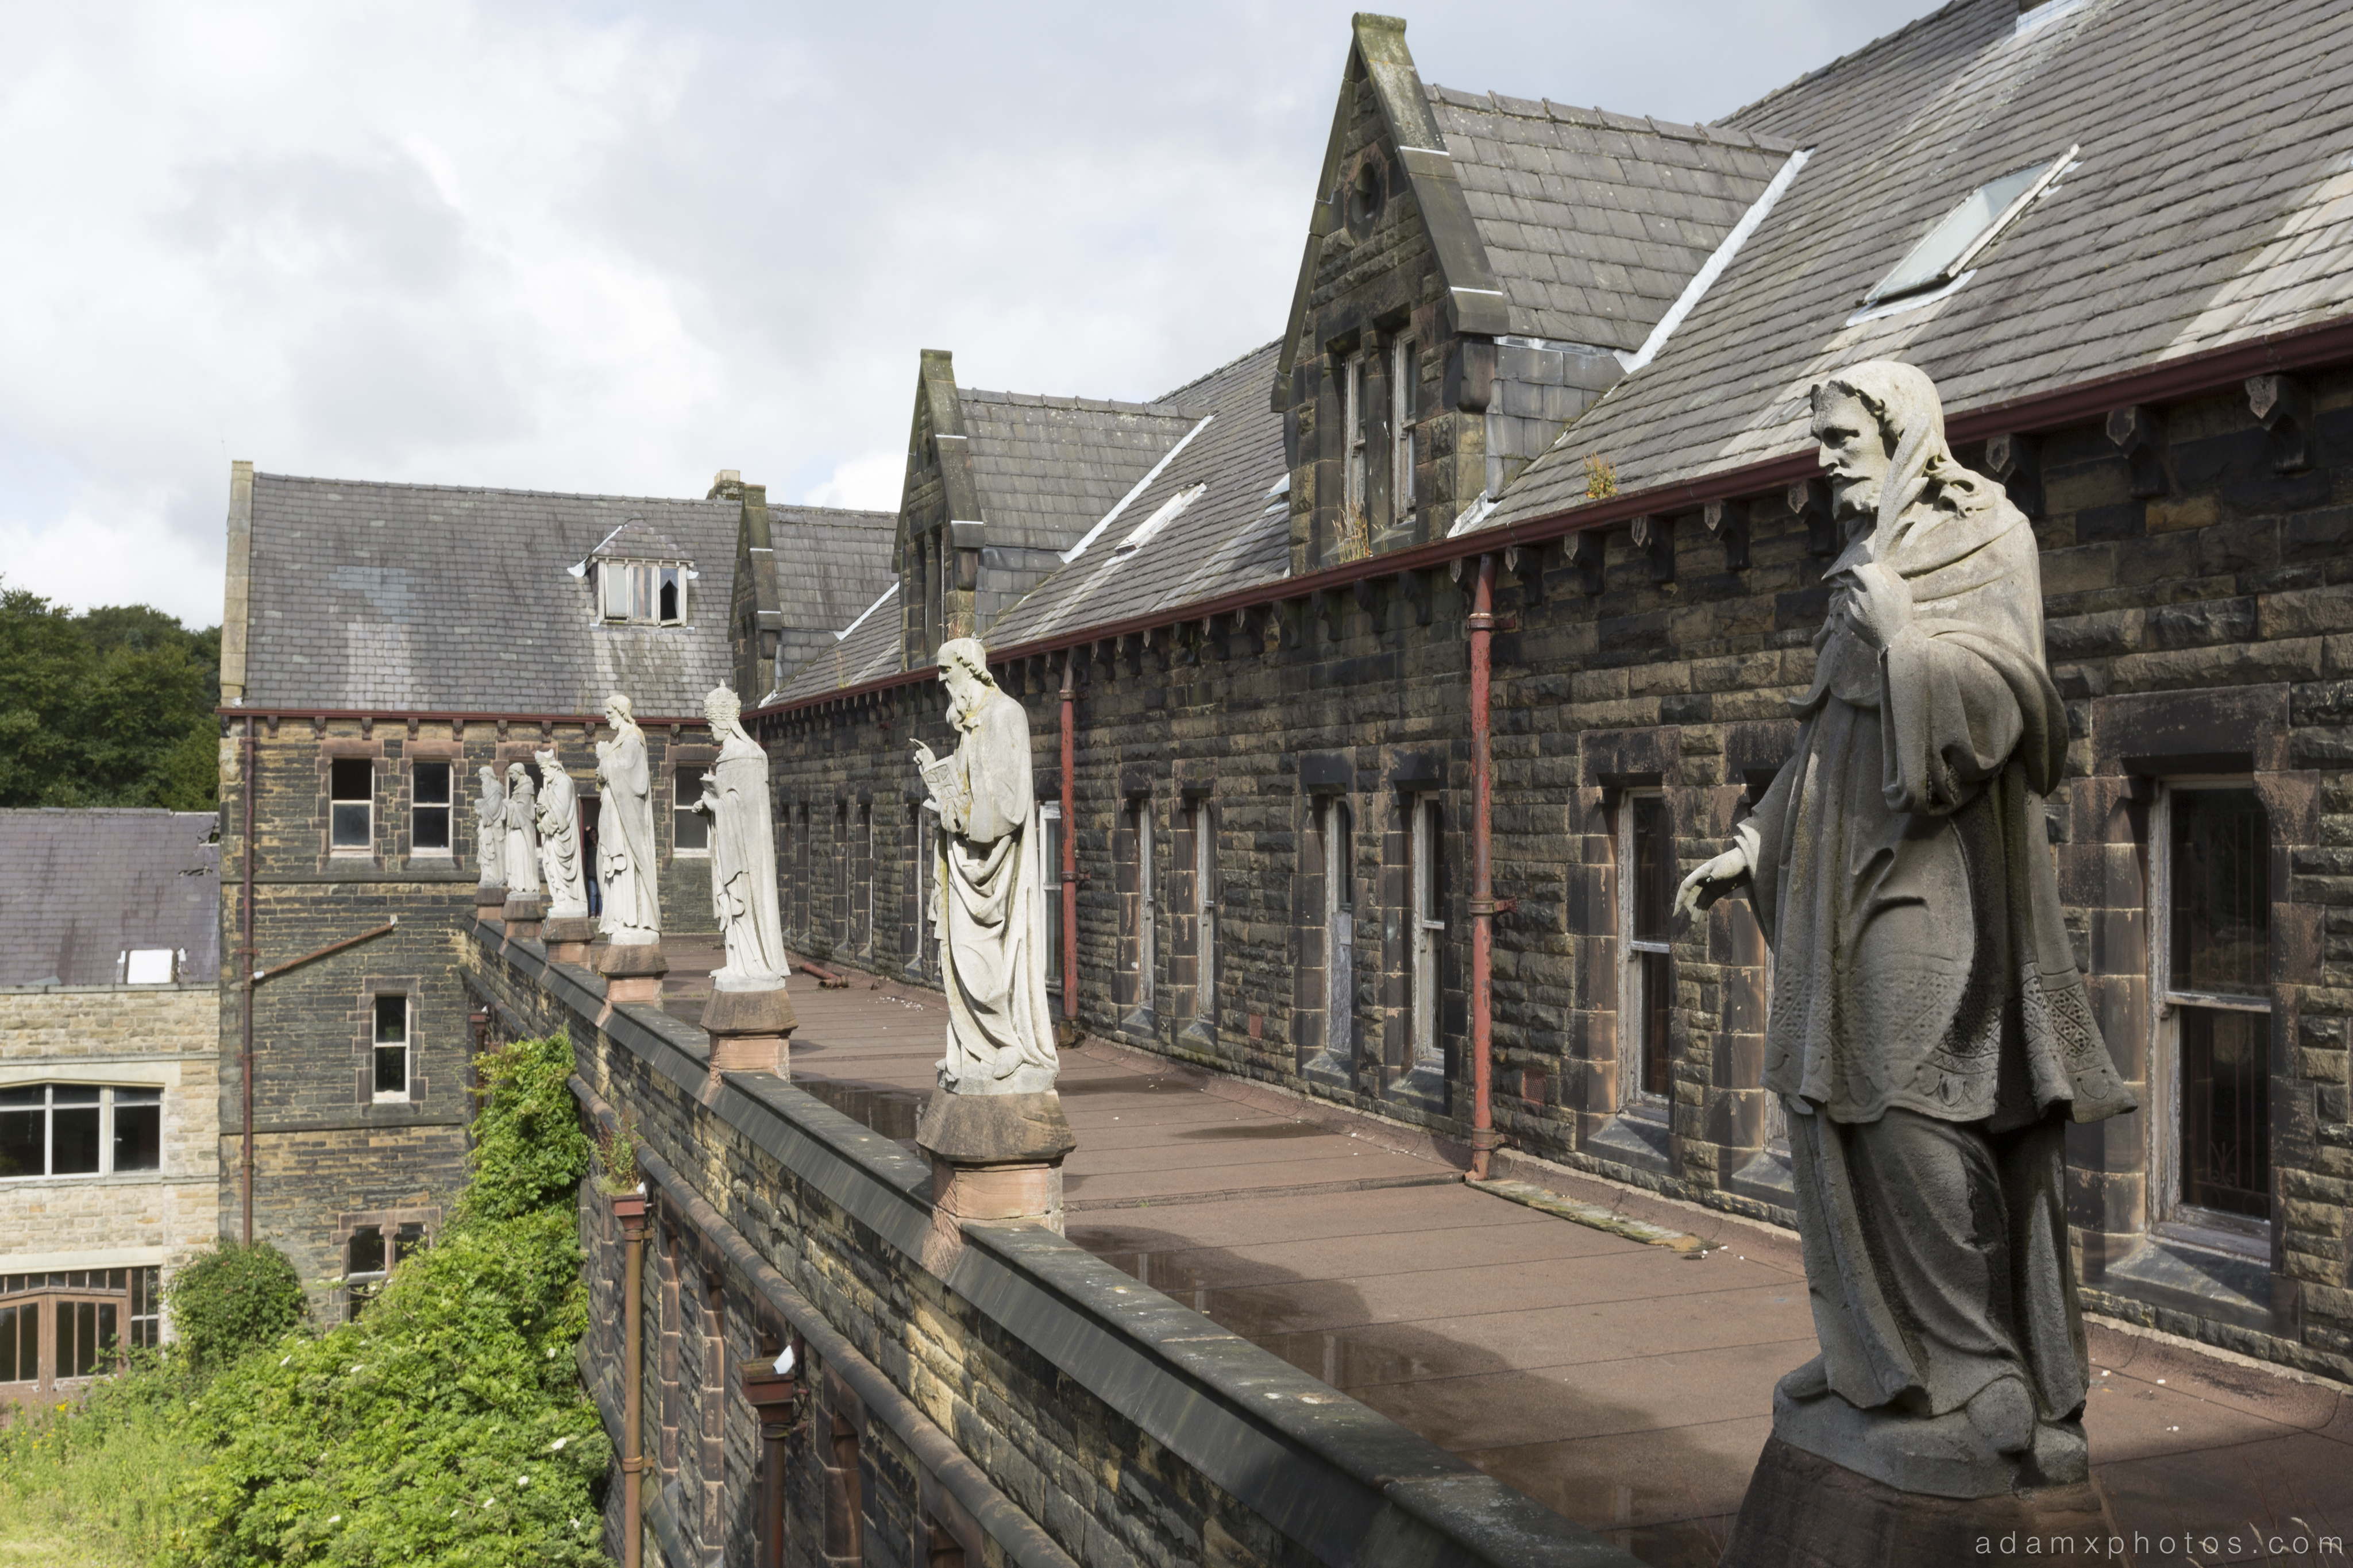 the guardians statues roof rooftop camping St Joseph's Seminary Joe's Upholland Urbex Adam X Urban Exploration 2015 Abandoned decay lost forgotten derelict